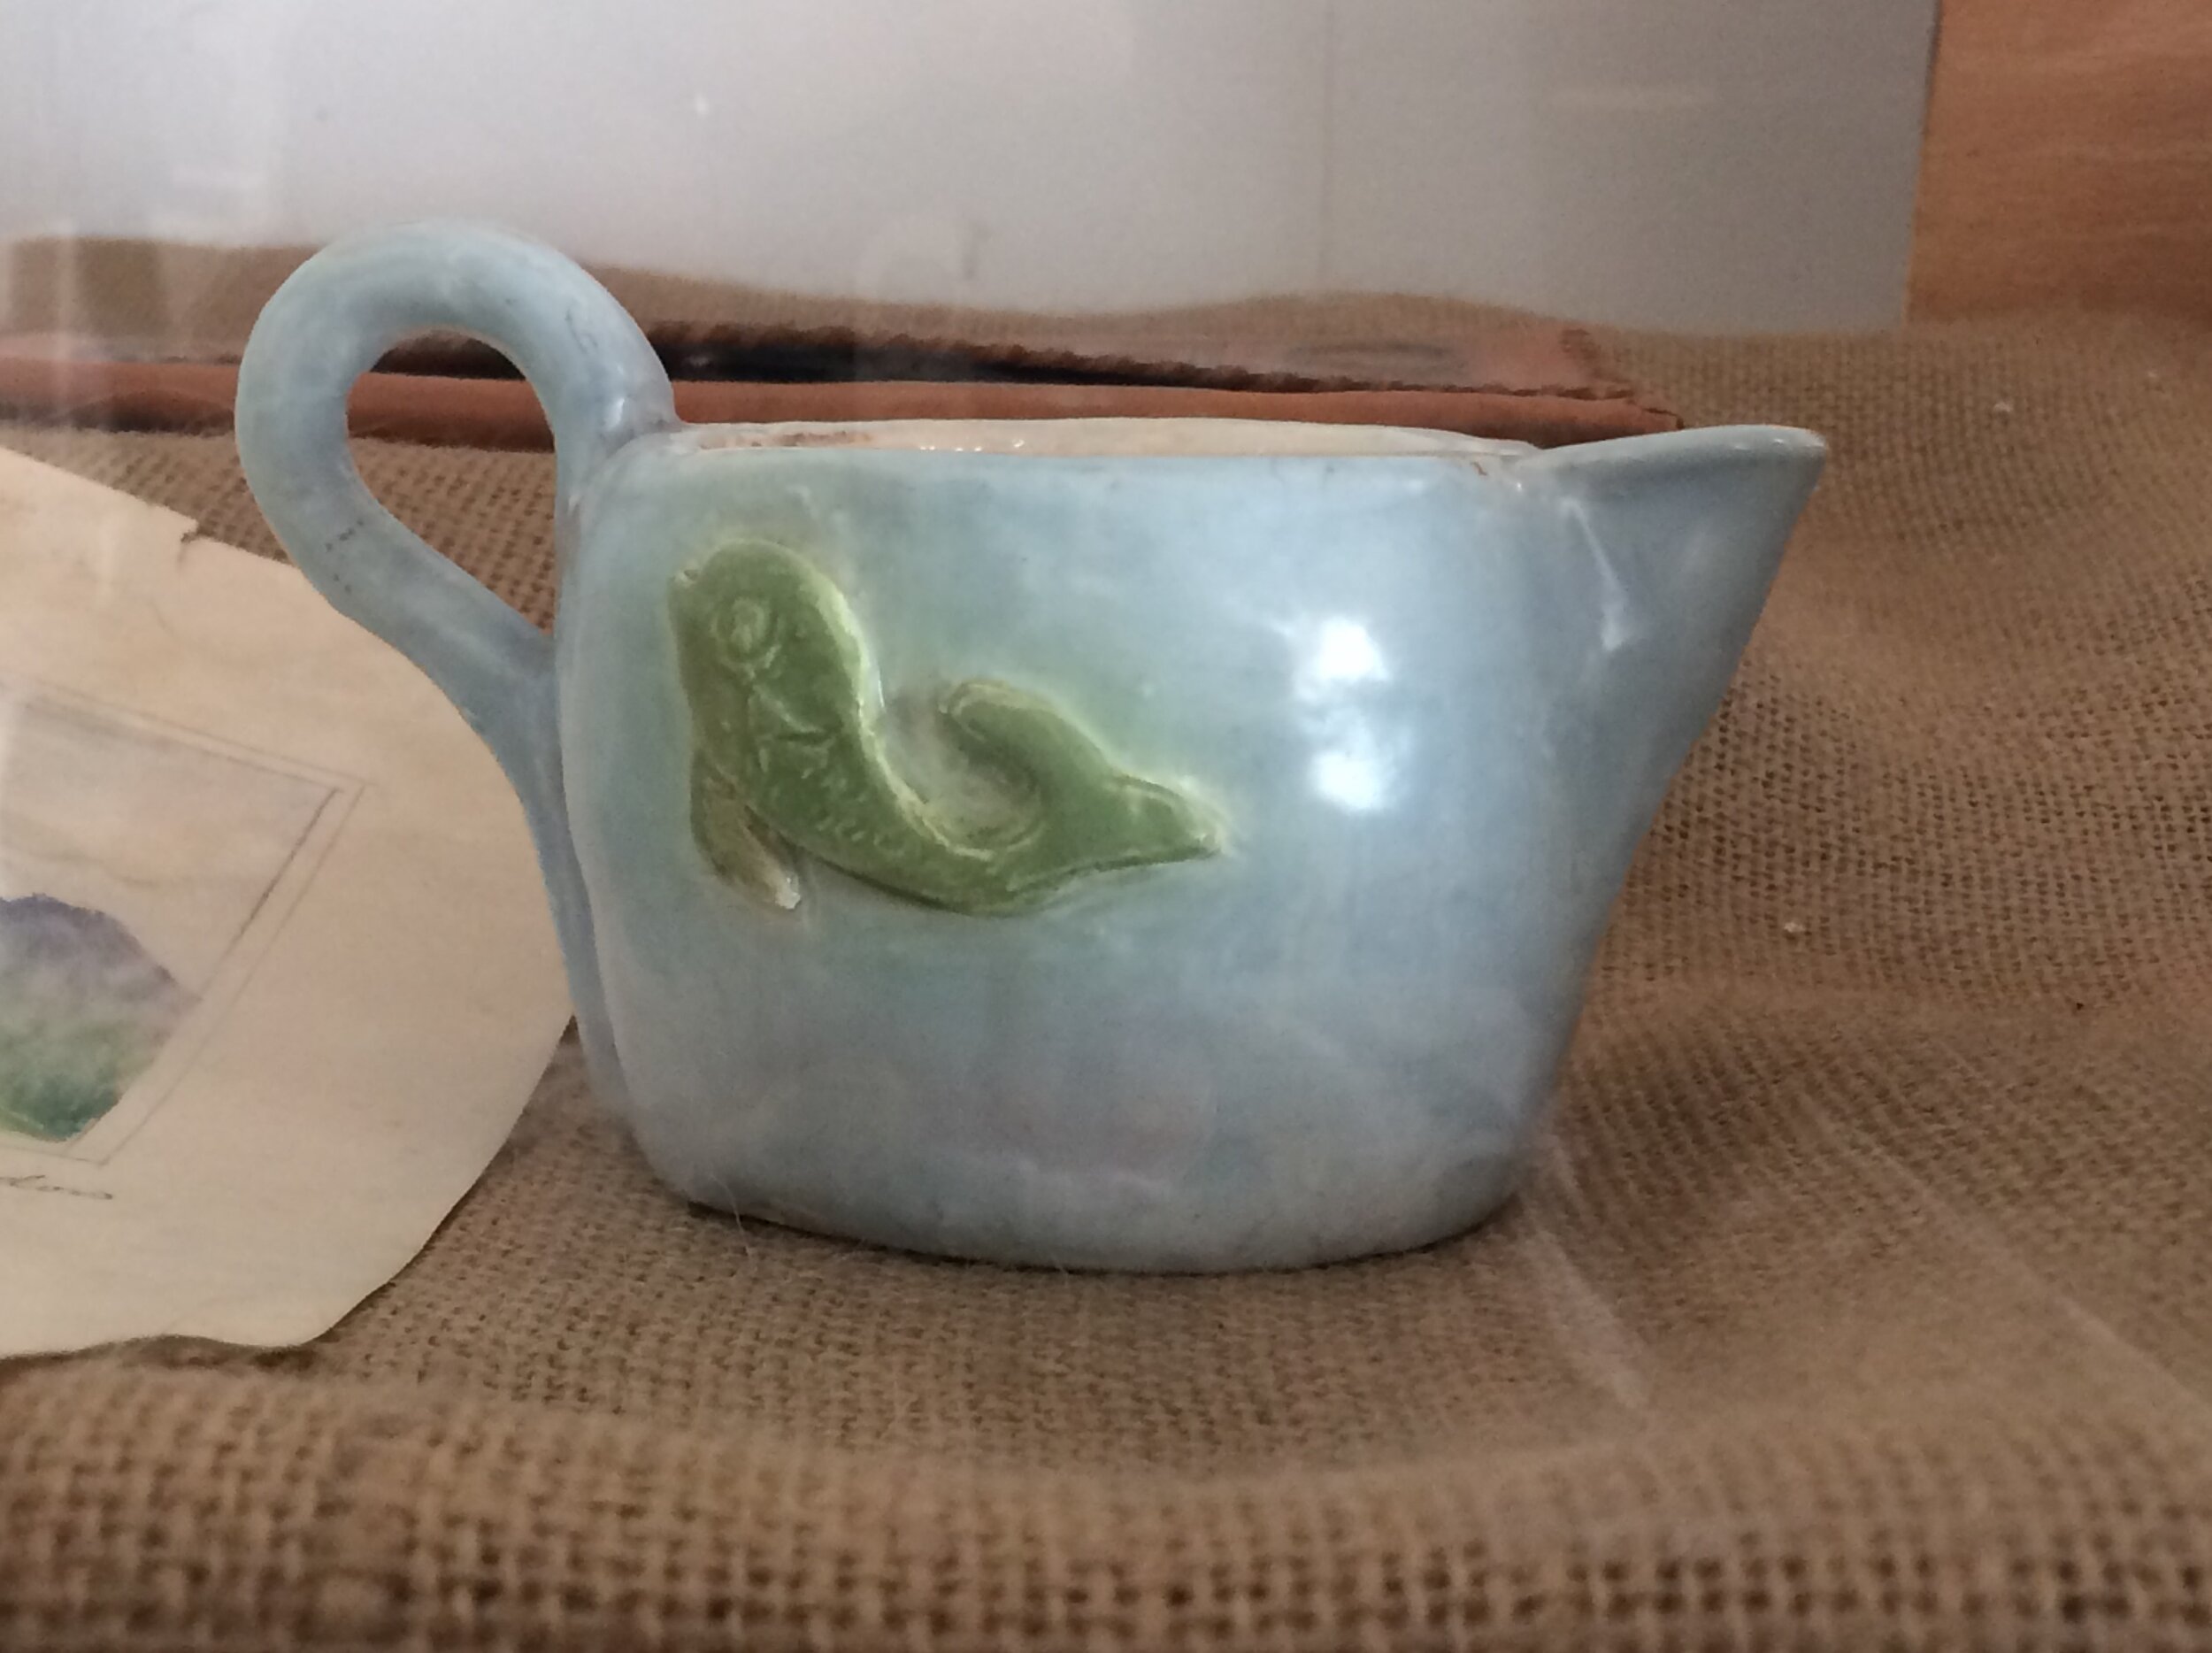  Handmade blue creamer with fish decoration inscribed by Ethel Baldwin 